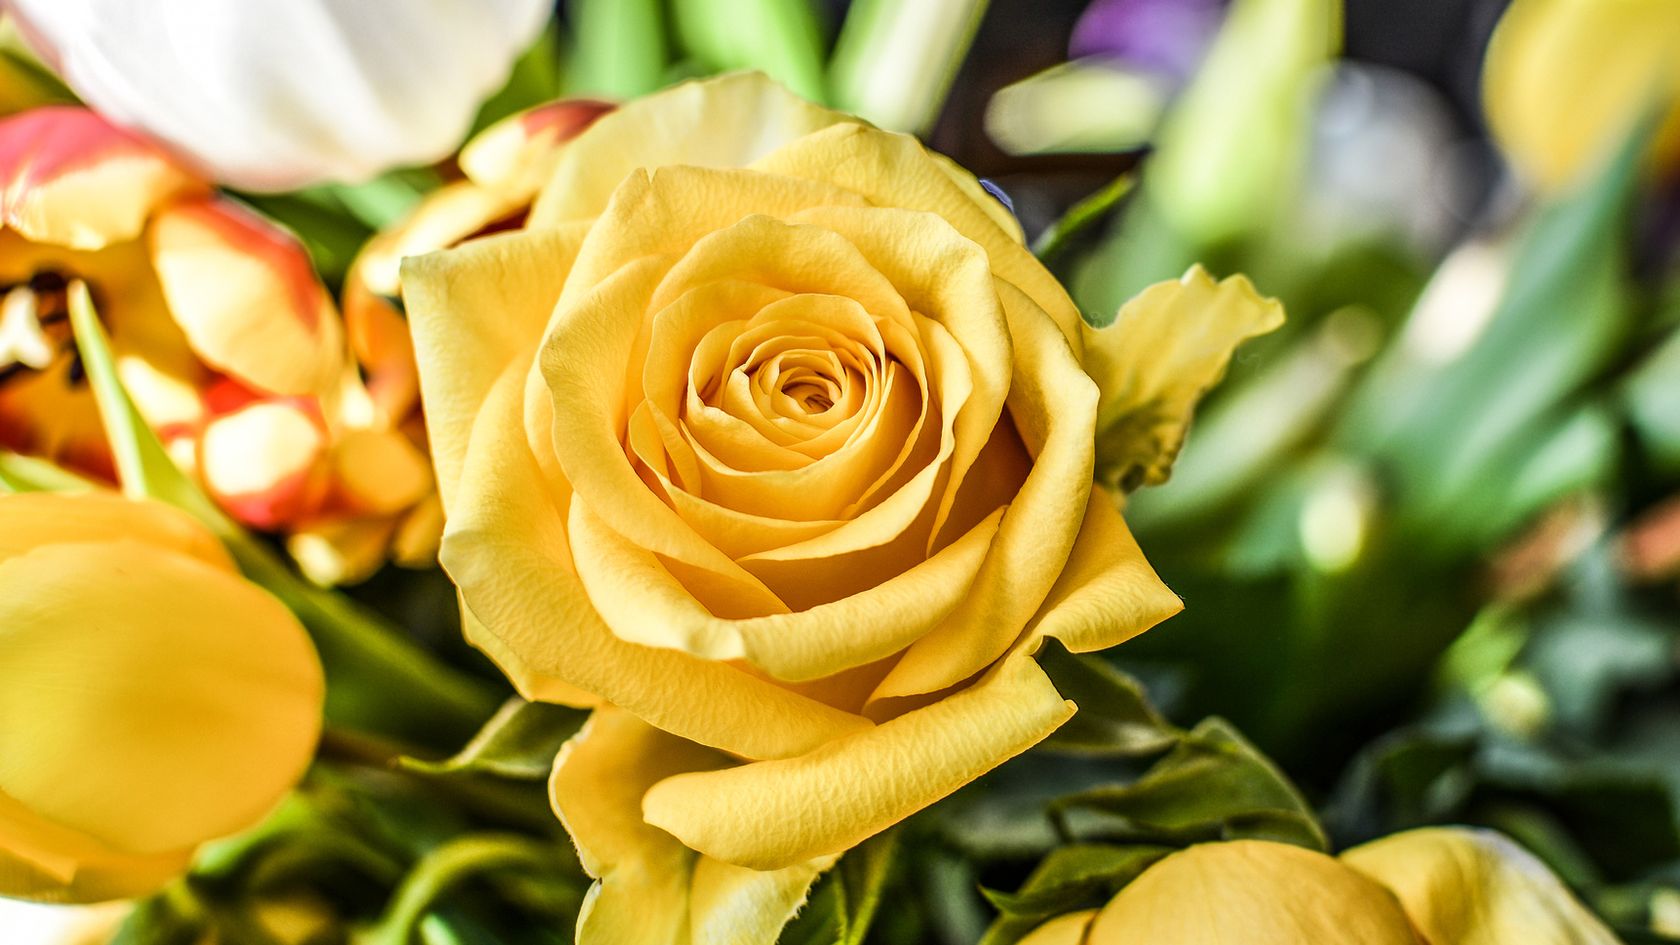 Save over 15% on Mother’s Day Flowers – and get FREE Sunday delivery